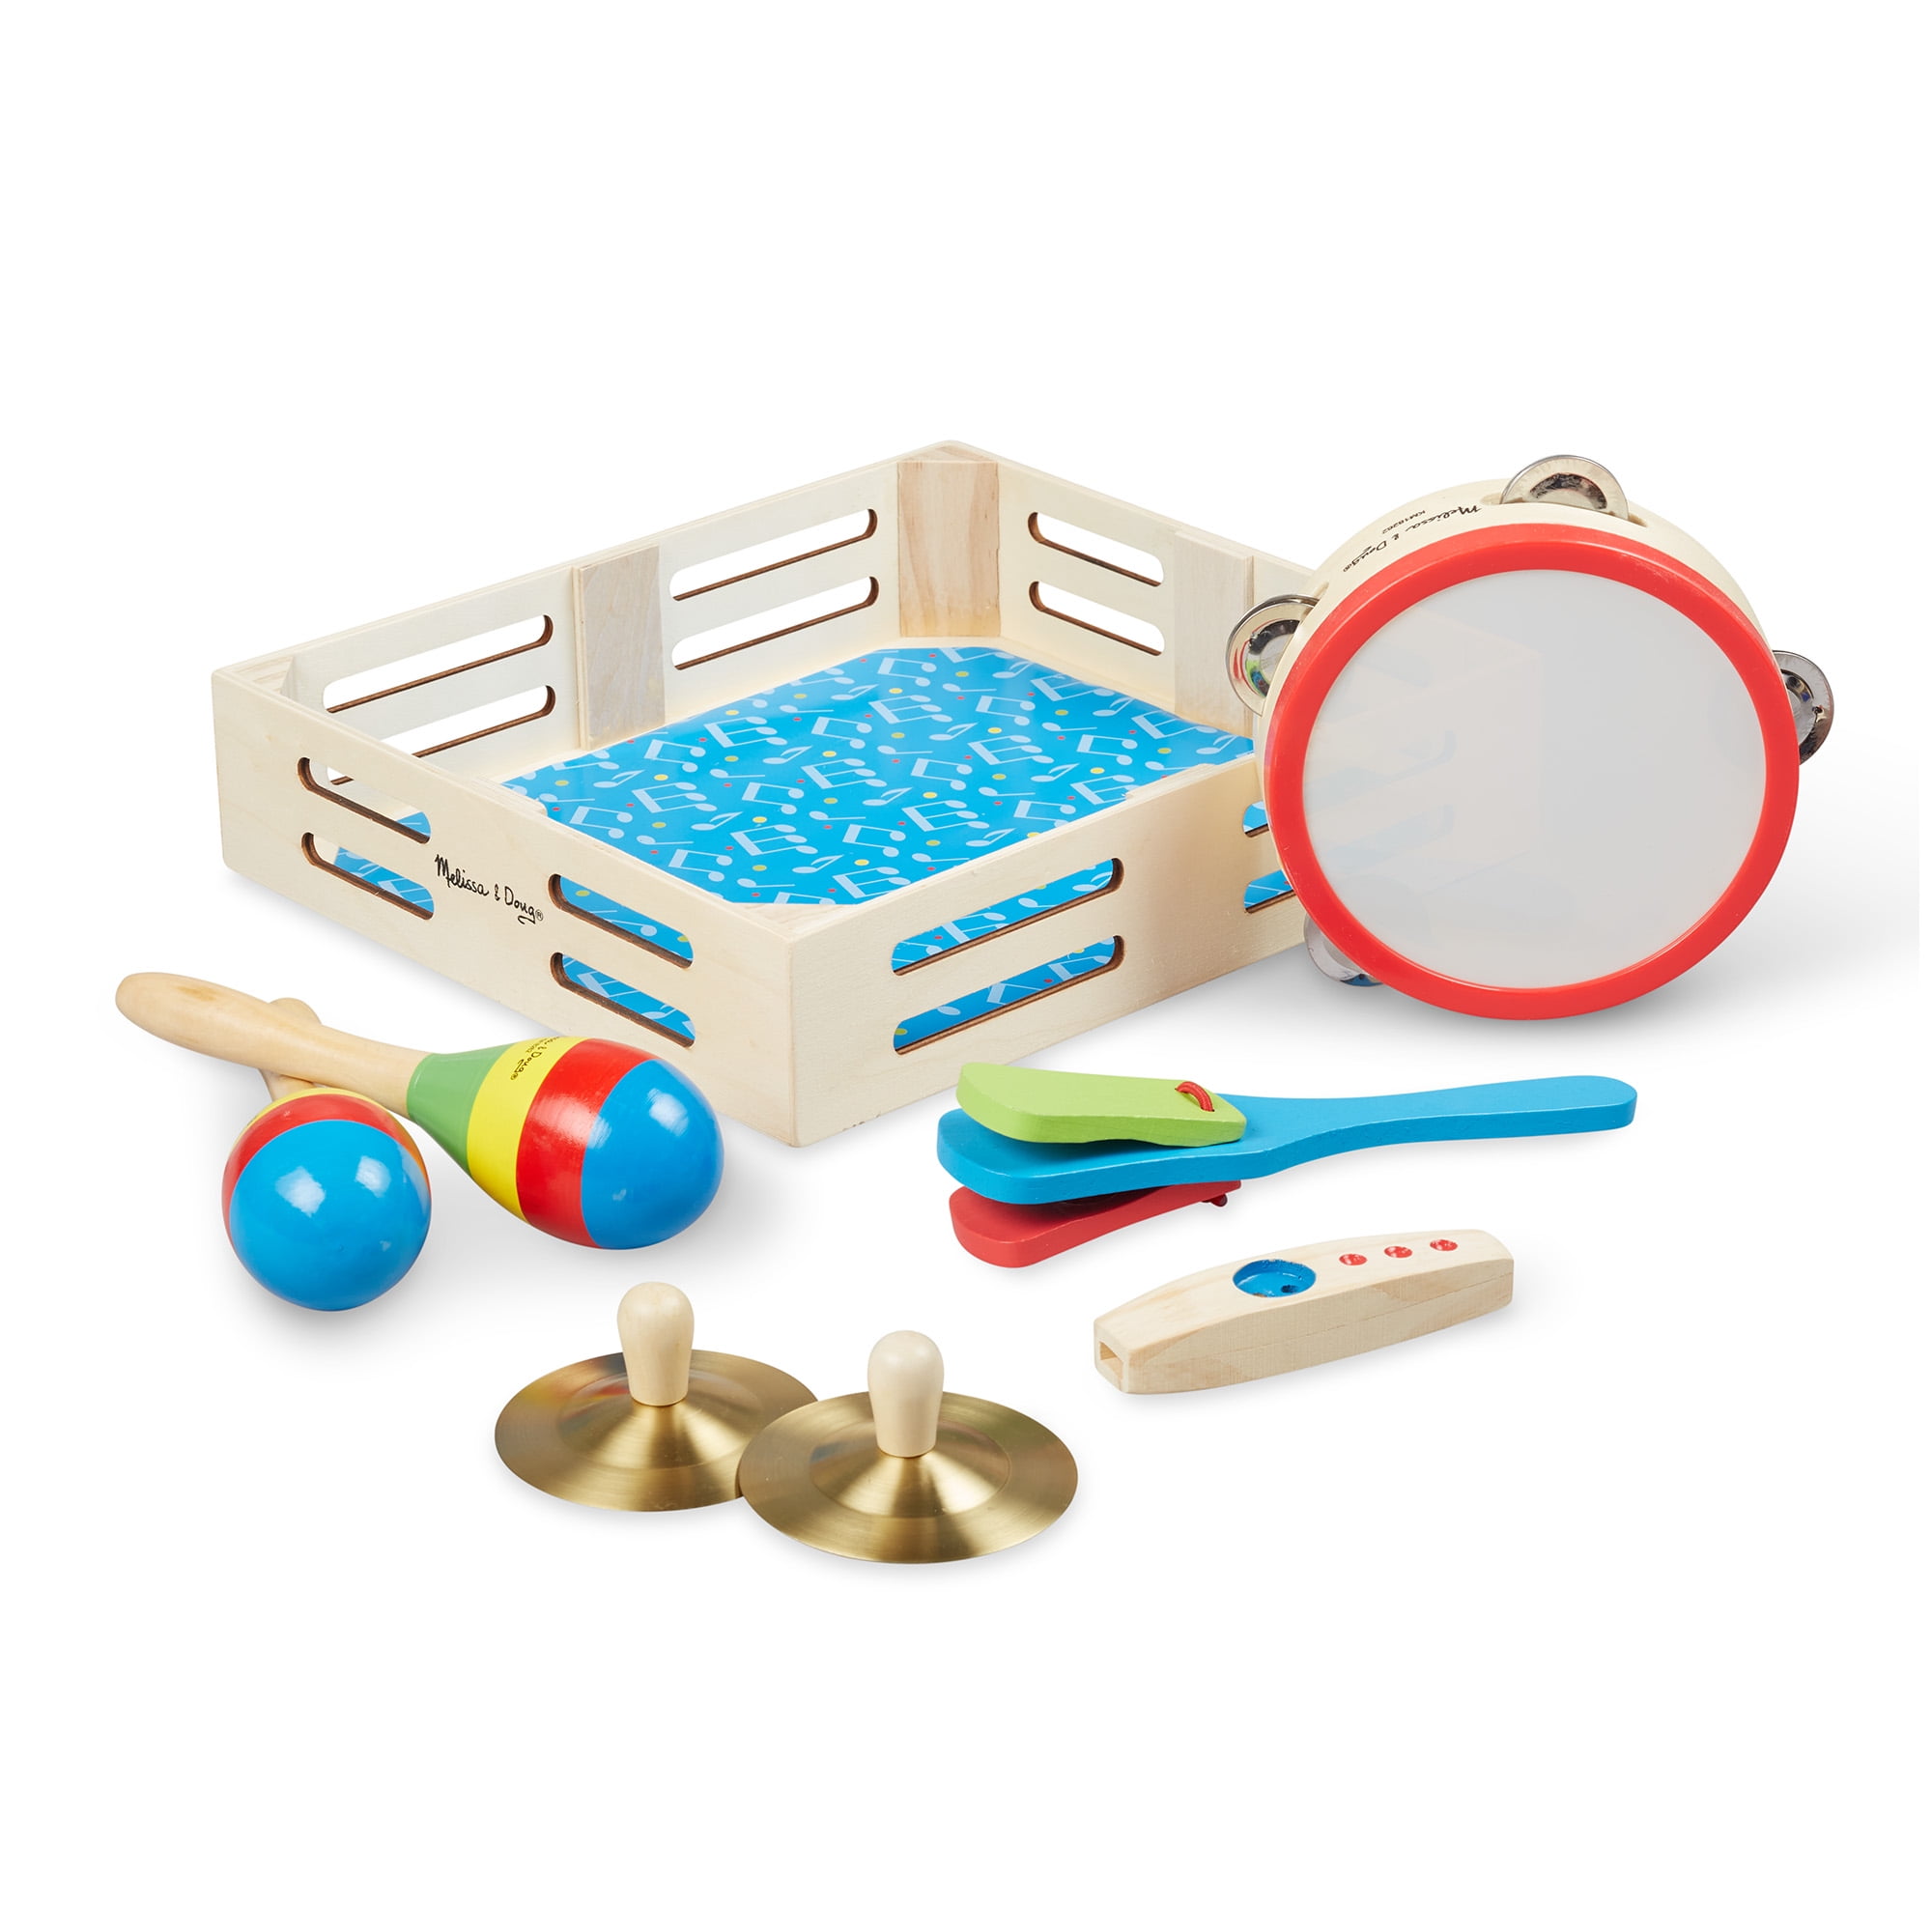 Kids Baby Early Learning Instrument Wooden Drum Musical Toy Play Fun FA 